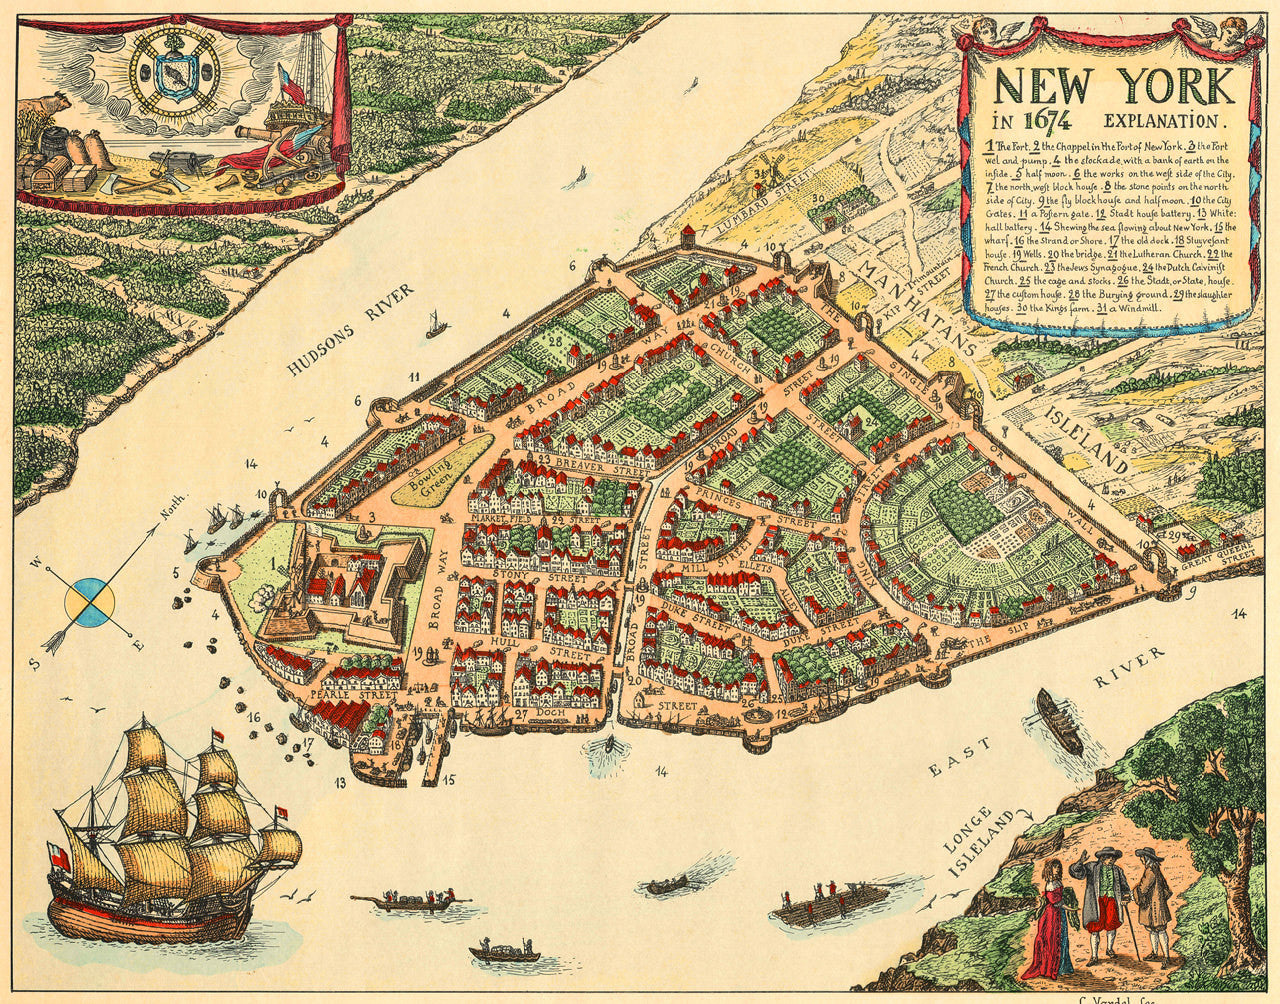 New York In 1674 Old Map Crop  82235.1465353250.1280.1280 ?v=1480559410